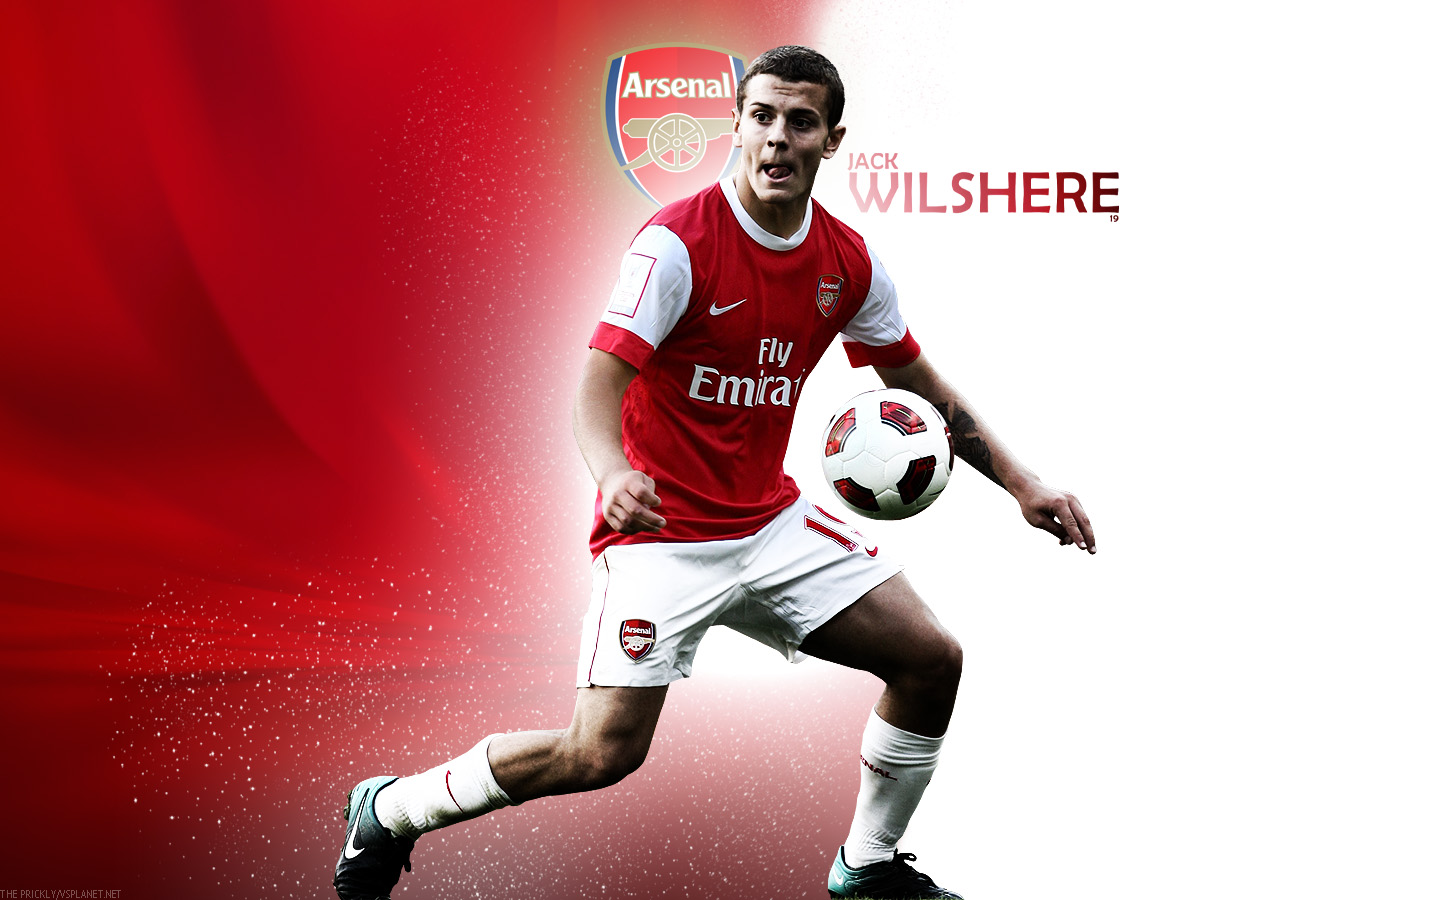 Top Football Players: Jack Wilshere Wallpapers